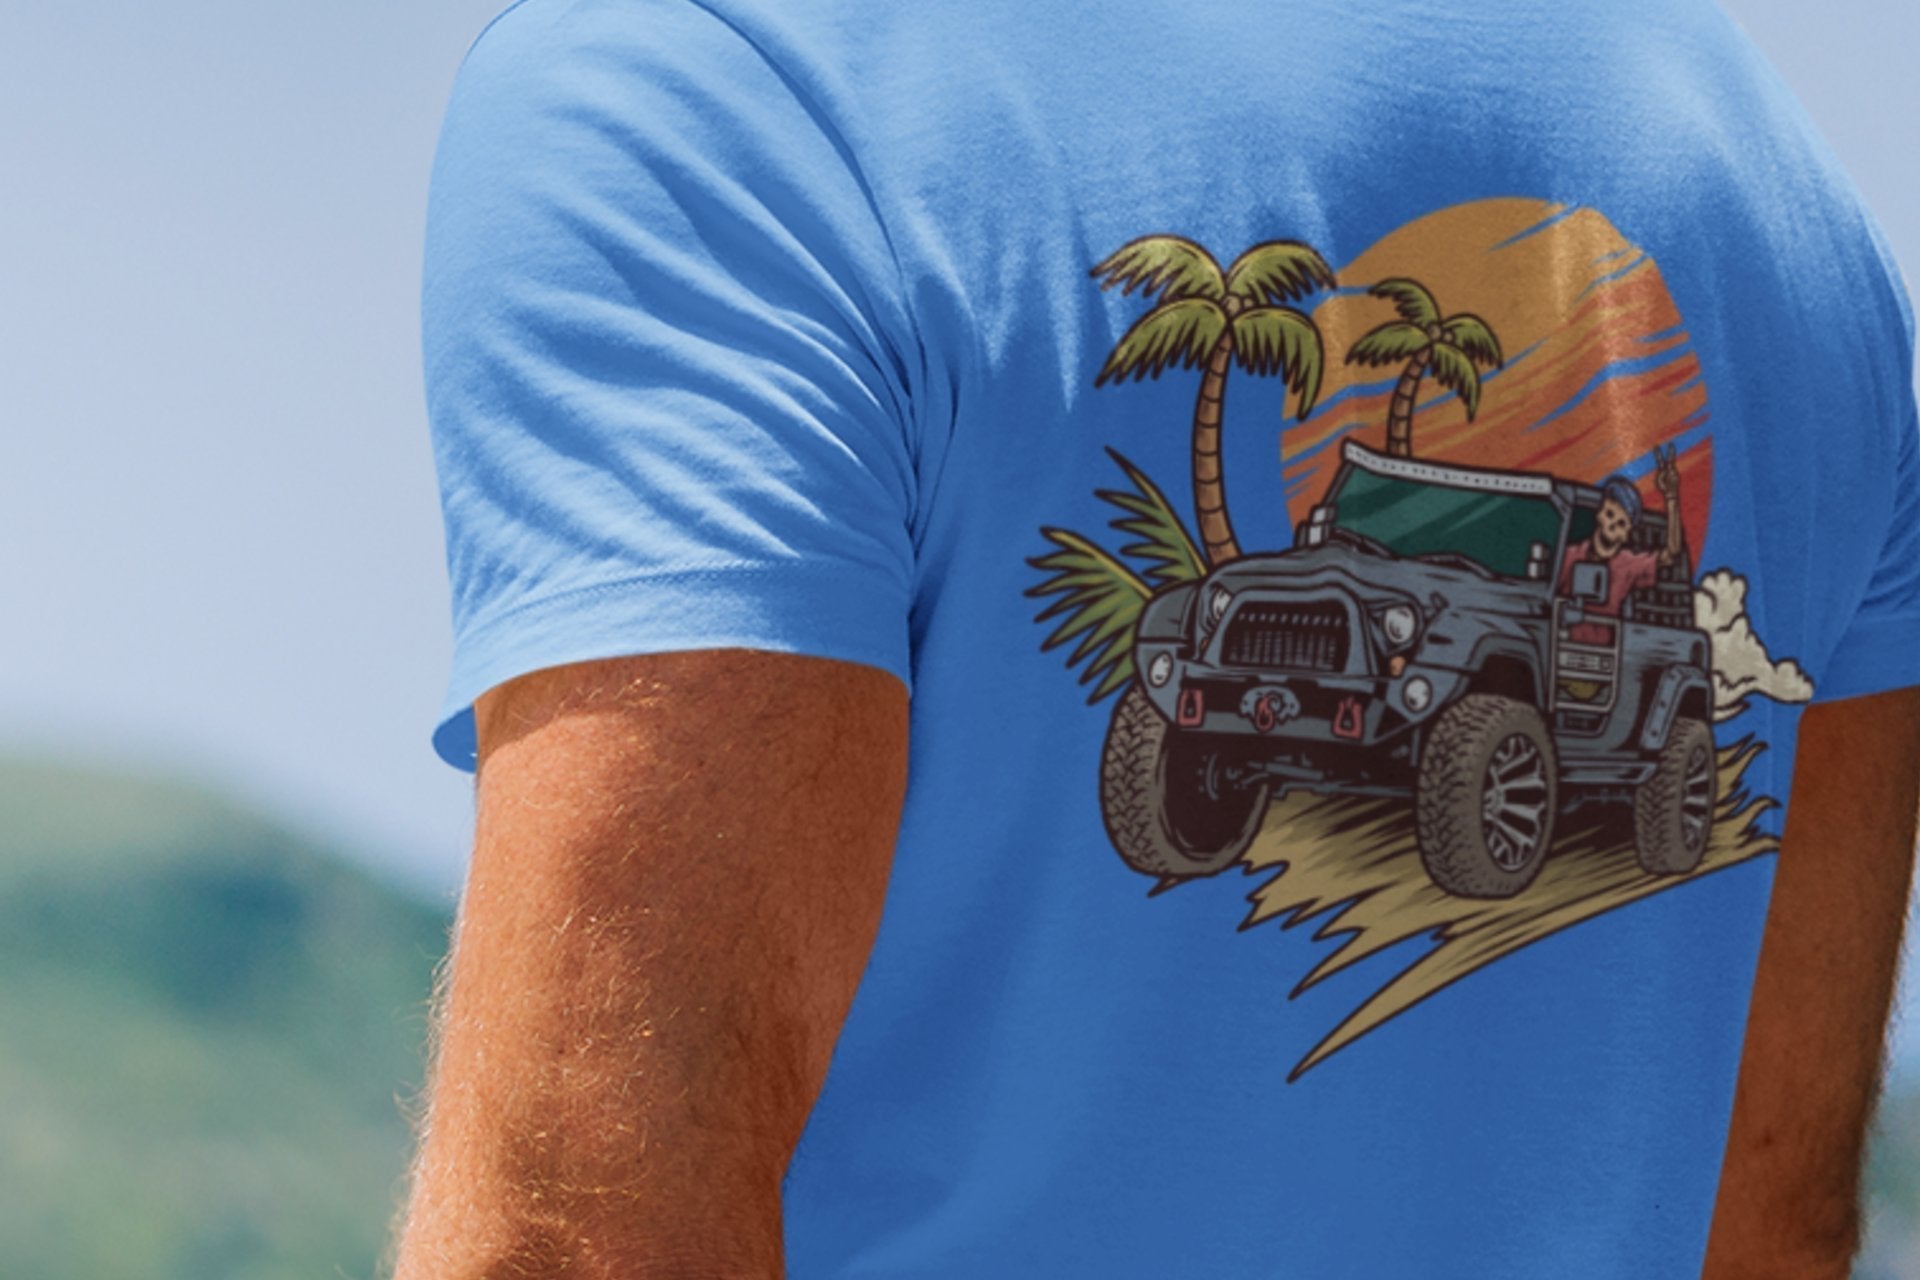 New Arrivals-Off Road Apparel - Goats Trail Off-Road Apparel Company-Jeep, Bronco, SXS, 4Runner and Snowmobile